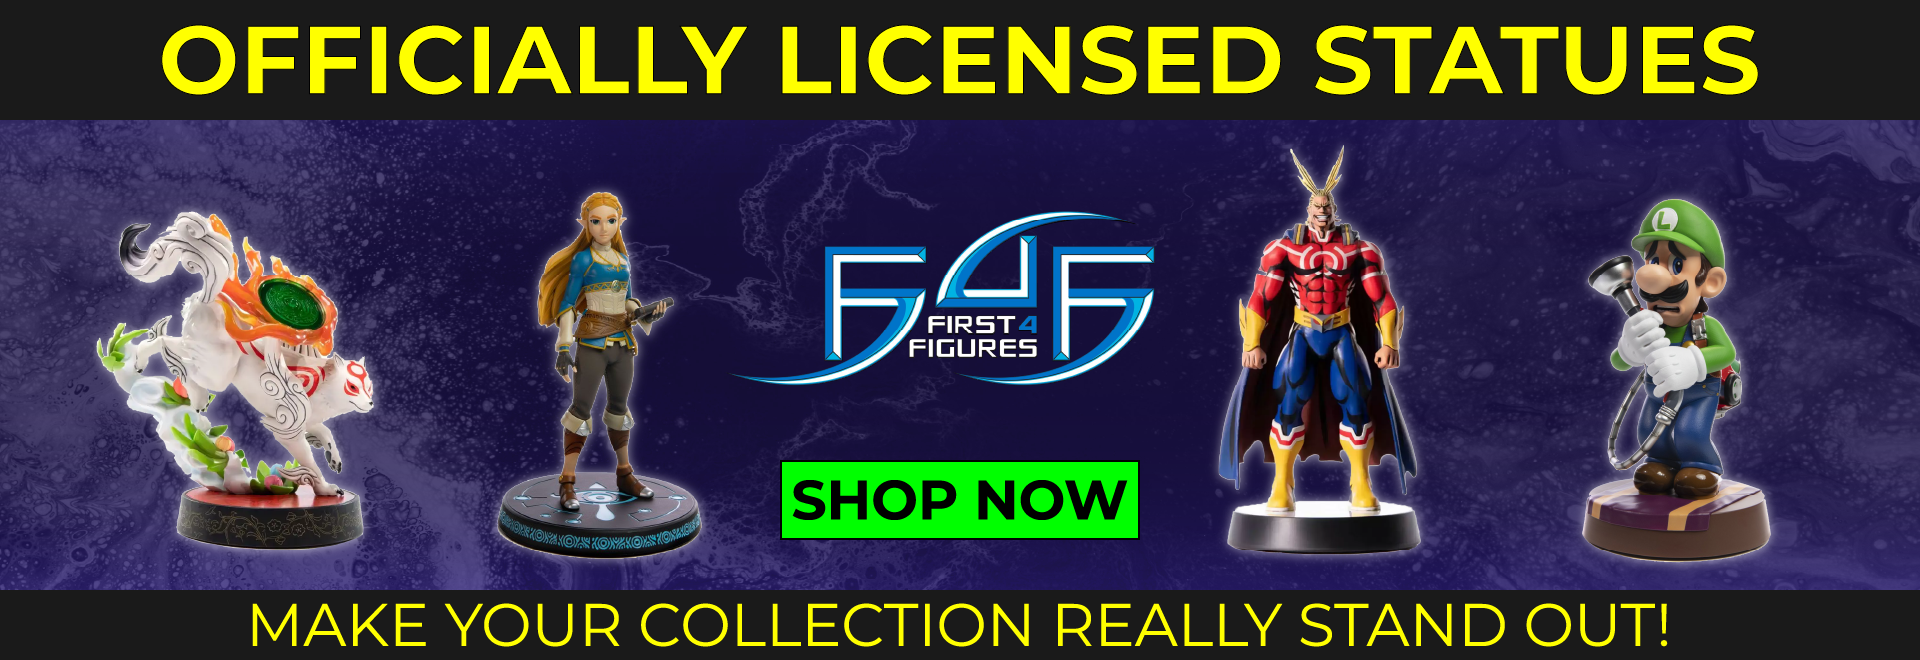 Officially licensed statues by F4F